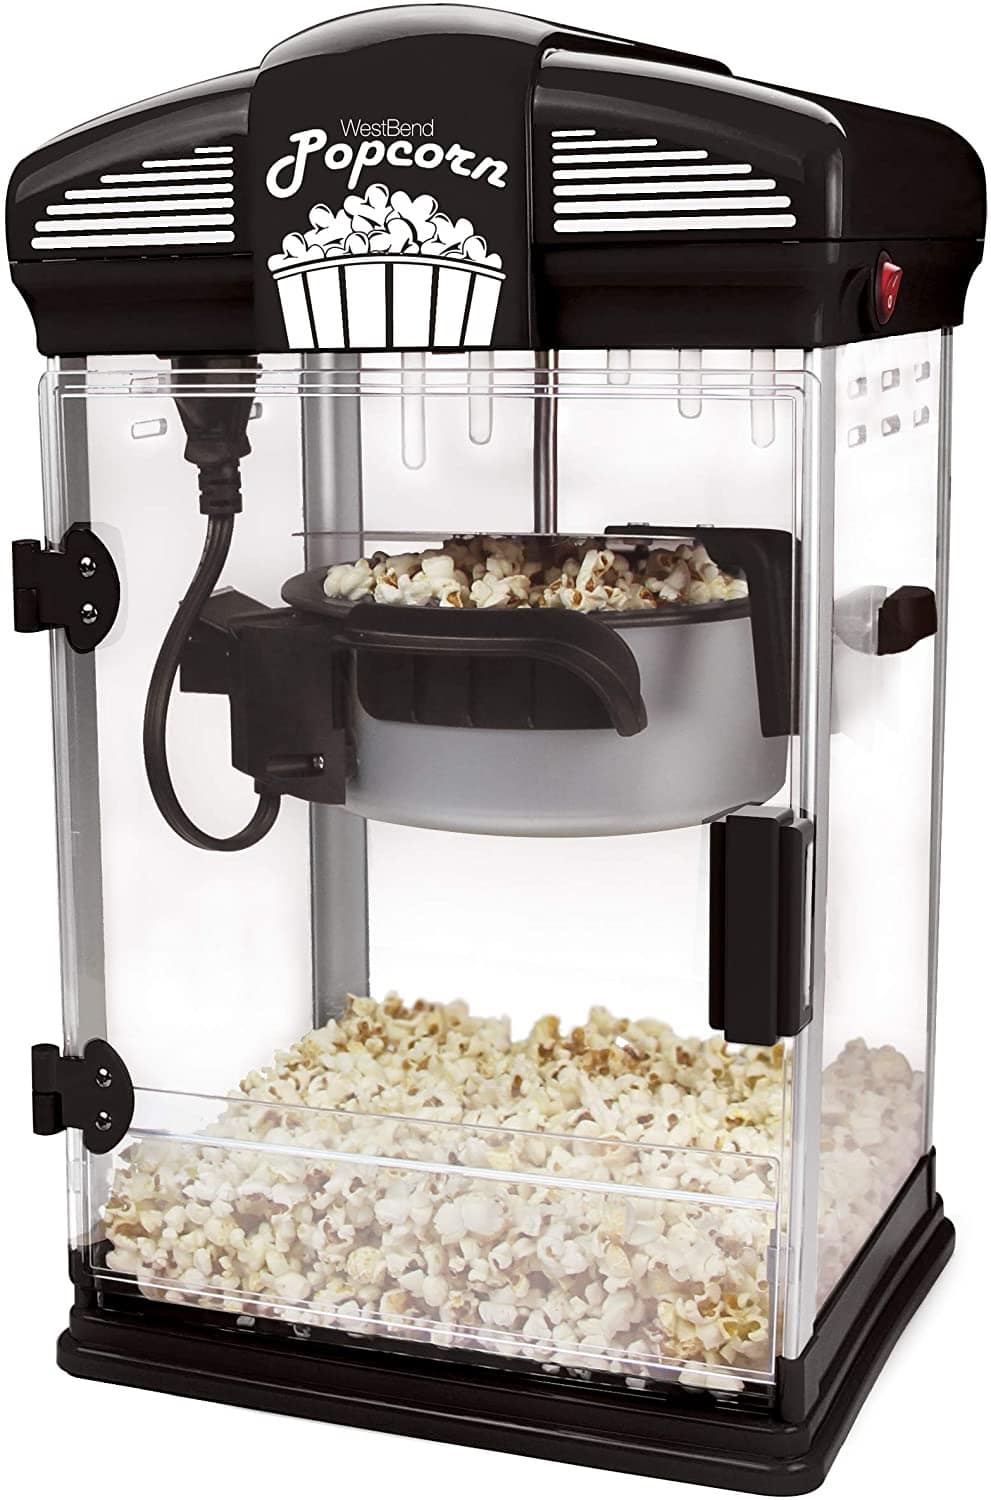 The 10 Best Popcorn Makers of 2021